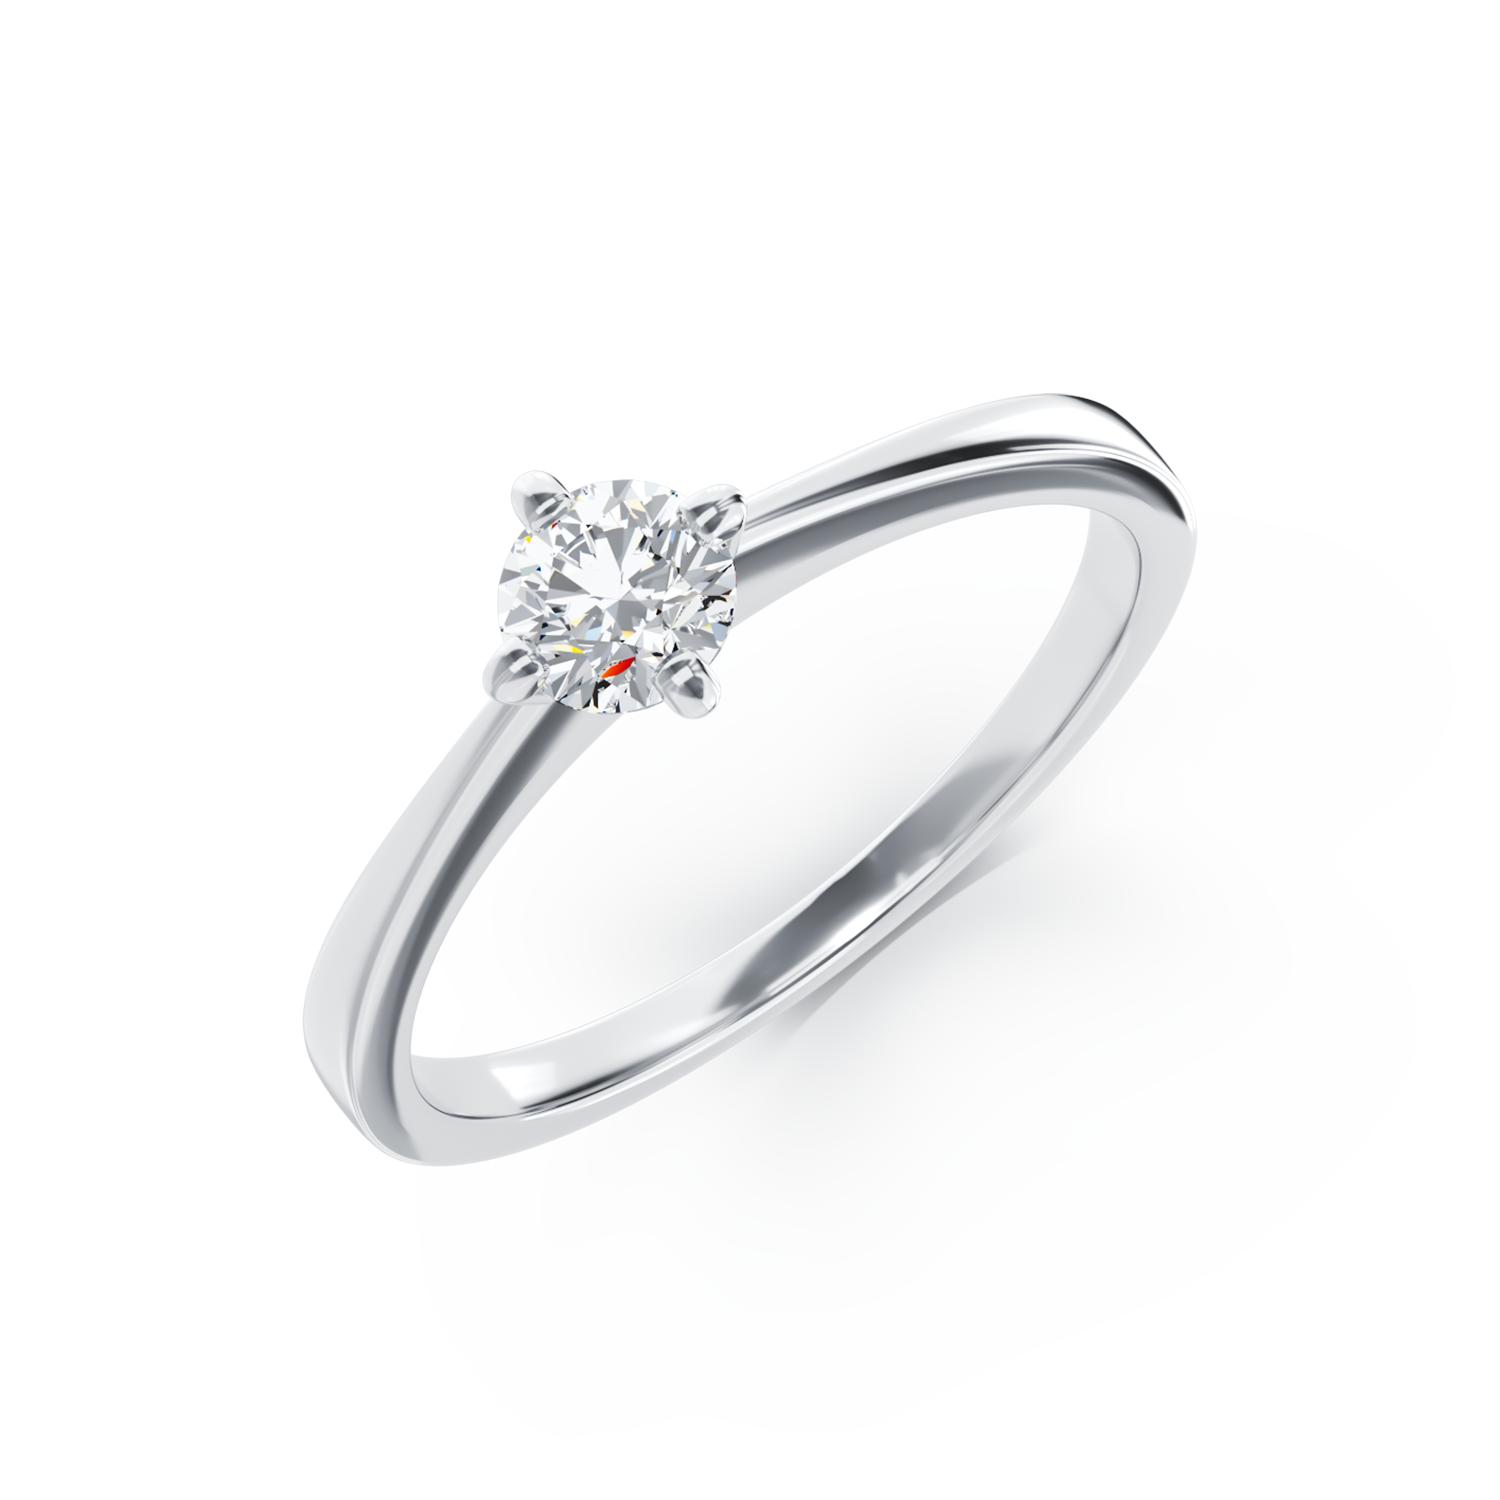 18K white gold engagement ring with a 0.305ct solitaire diamond